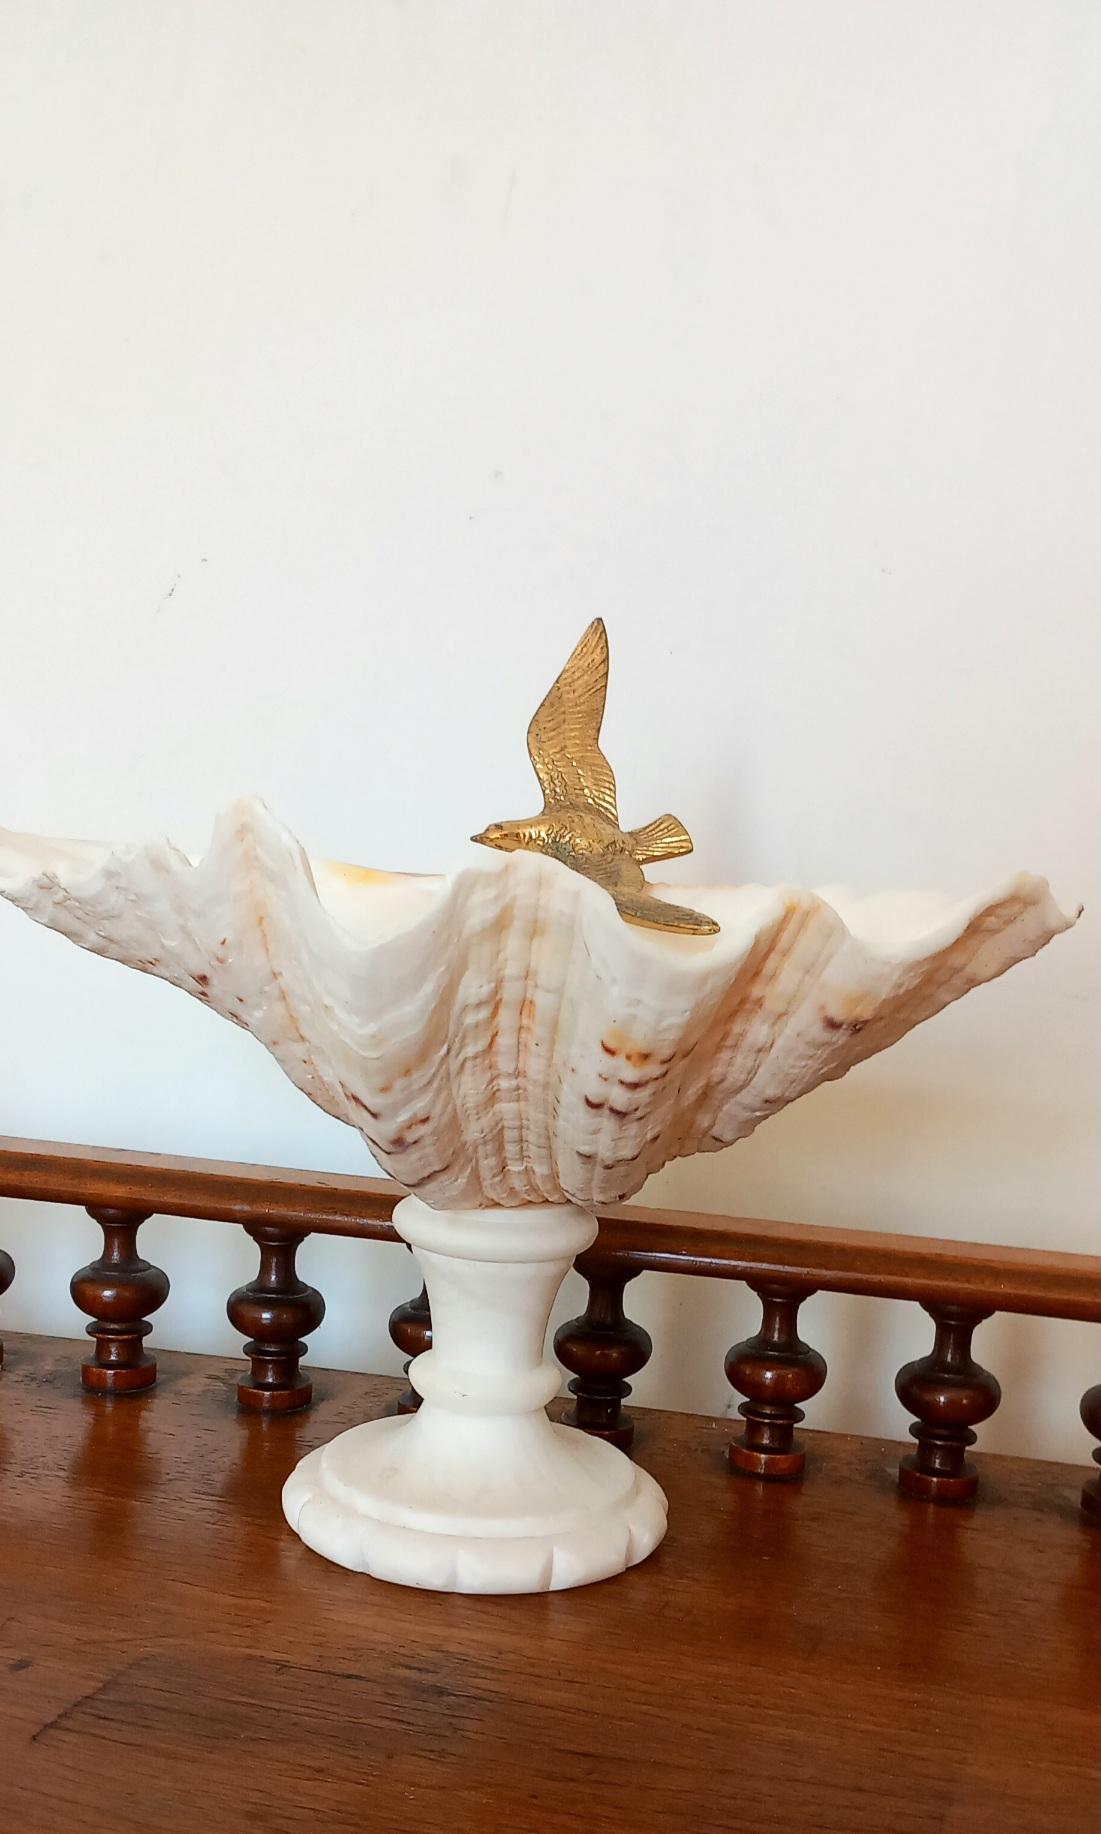  Shell Natural Specimen  With White Marble Pedestal Bronze Bird Can Be Removed For Sale 9